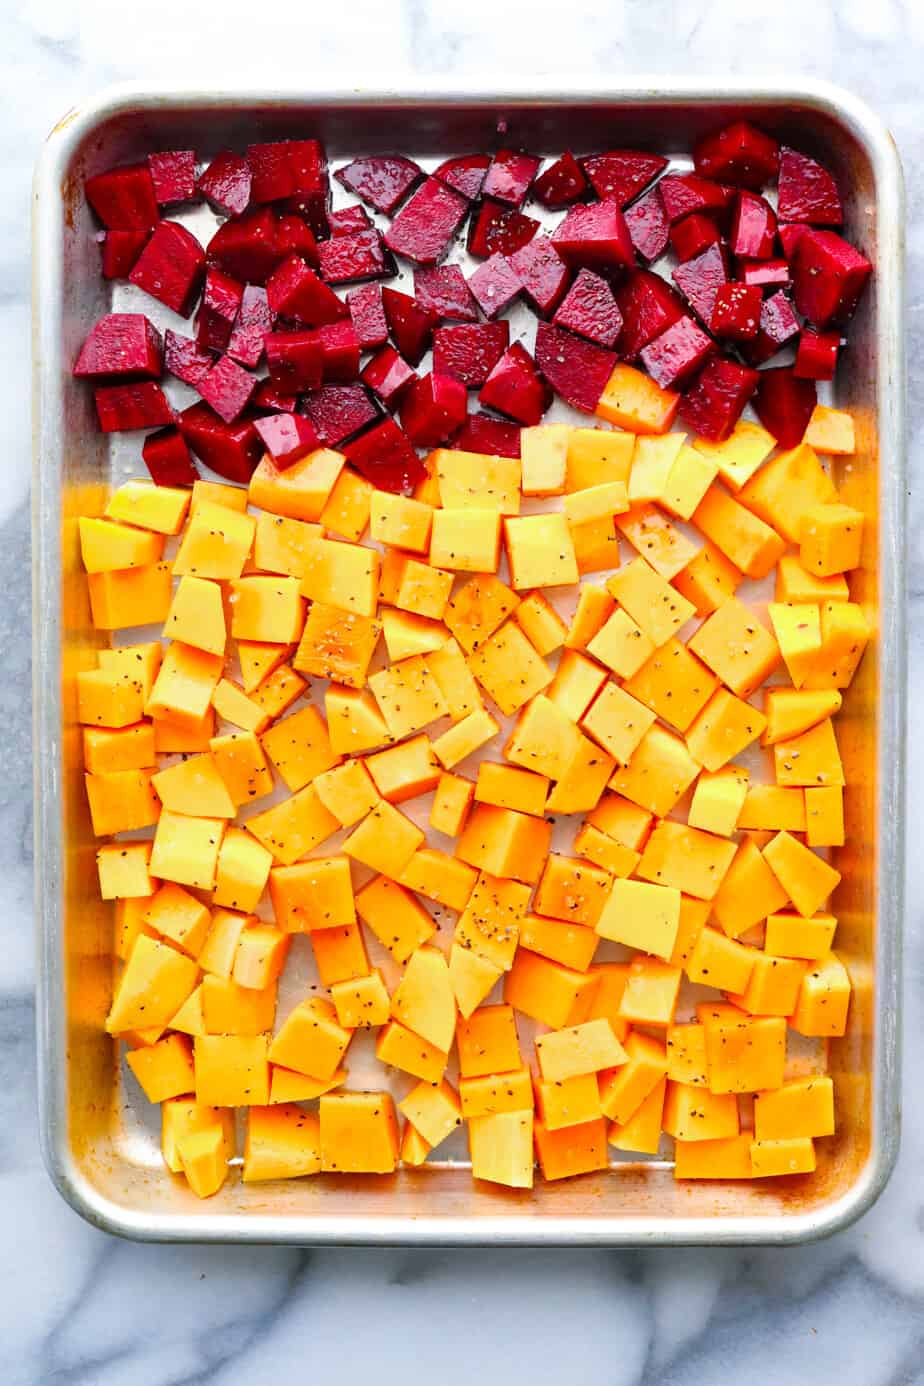 Beets and squash cubed on a sheet pan. 